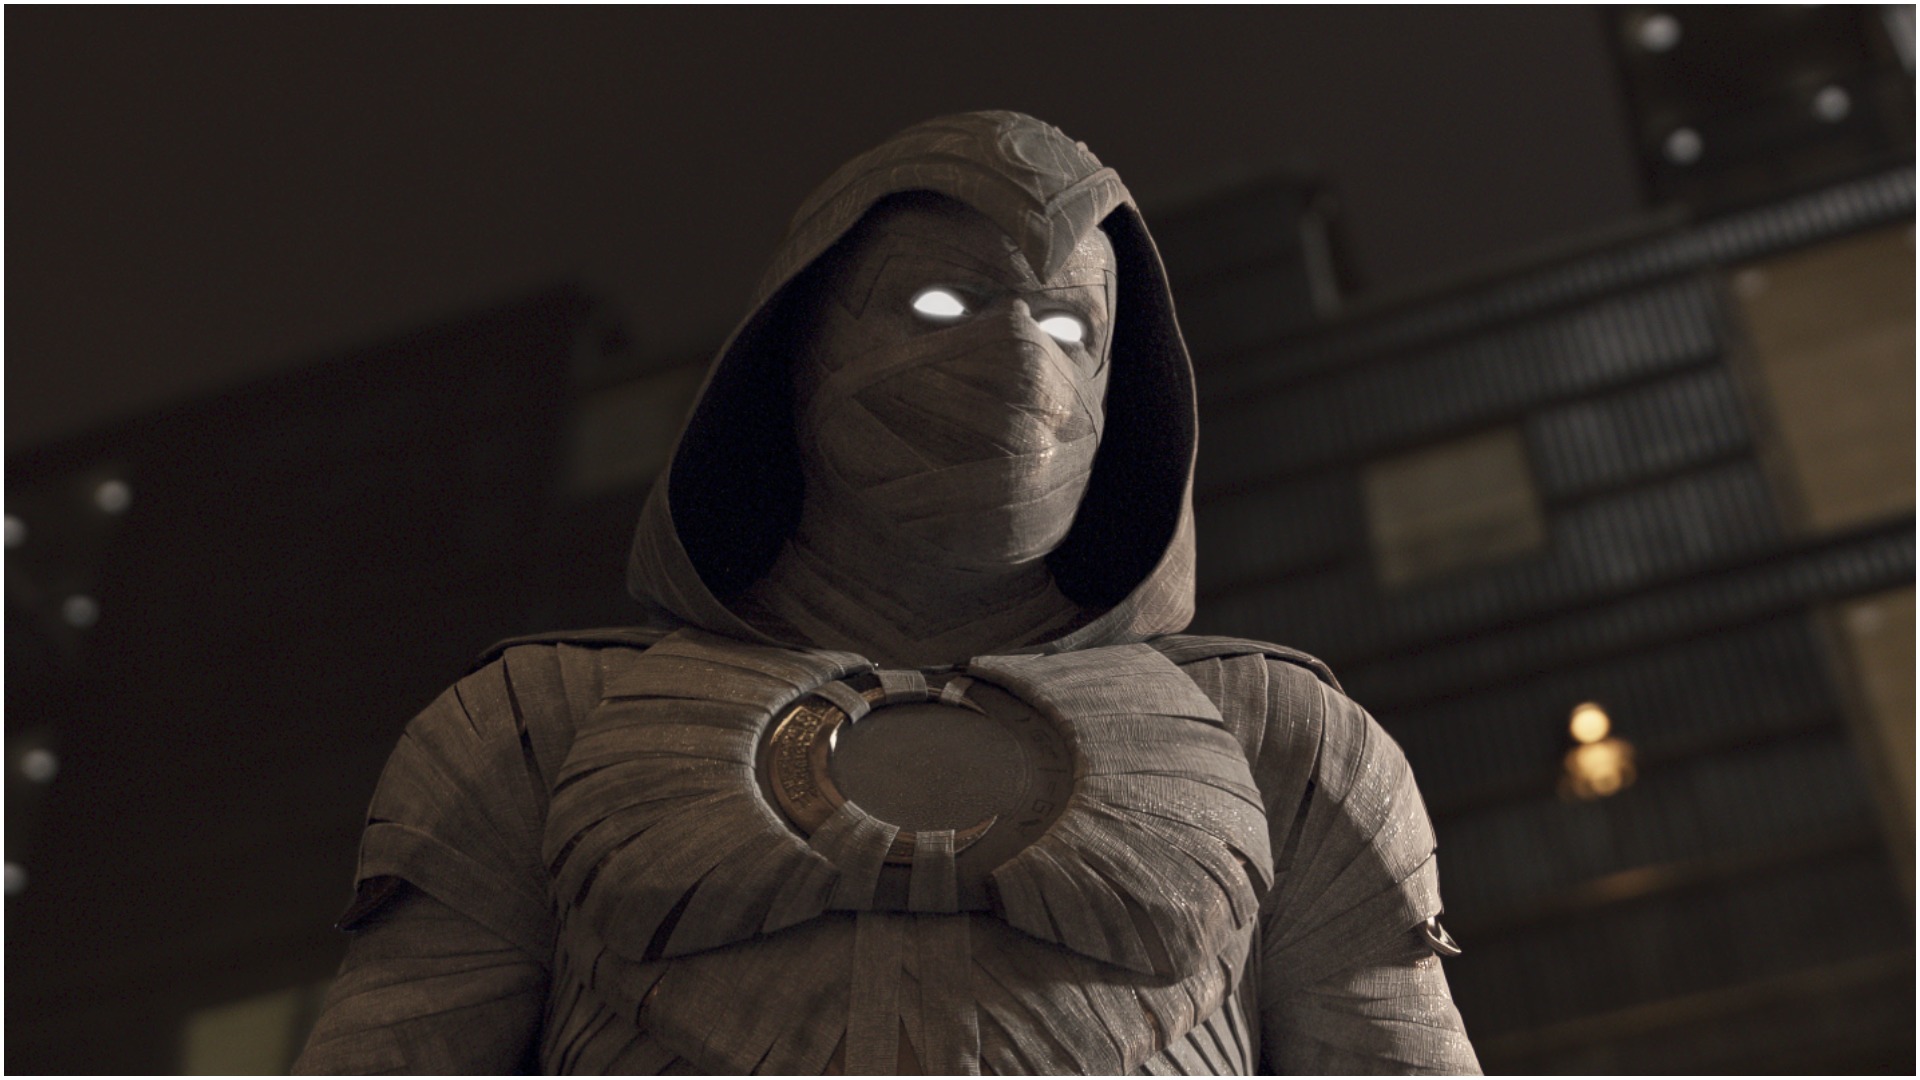 Moon Knight done goofed: viewers spot an accidental crew member in the background of a shot